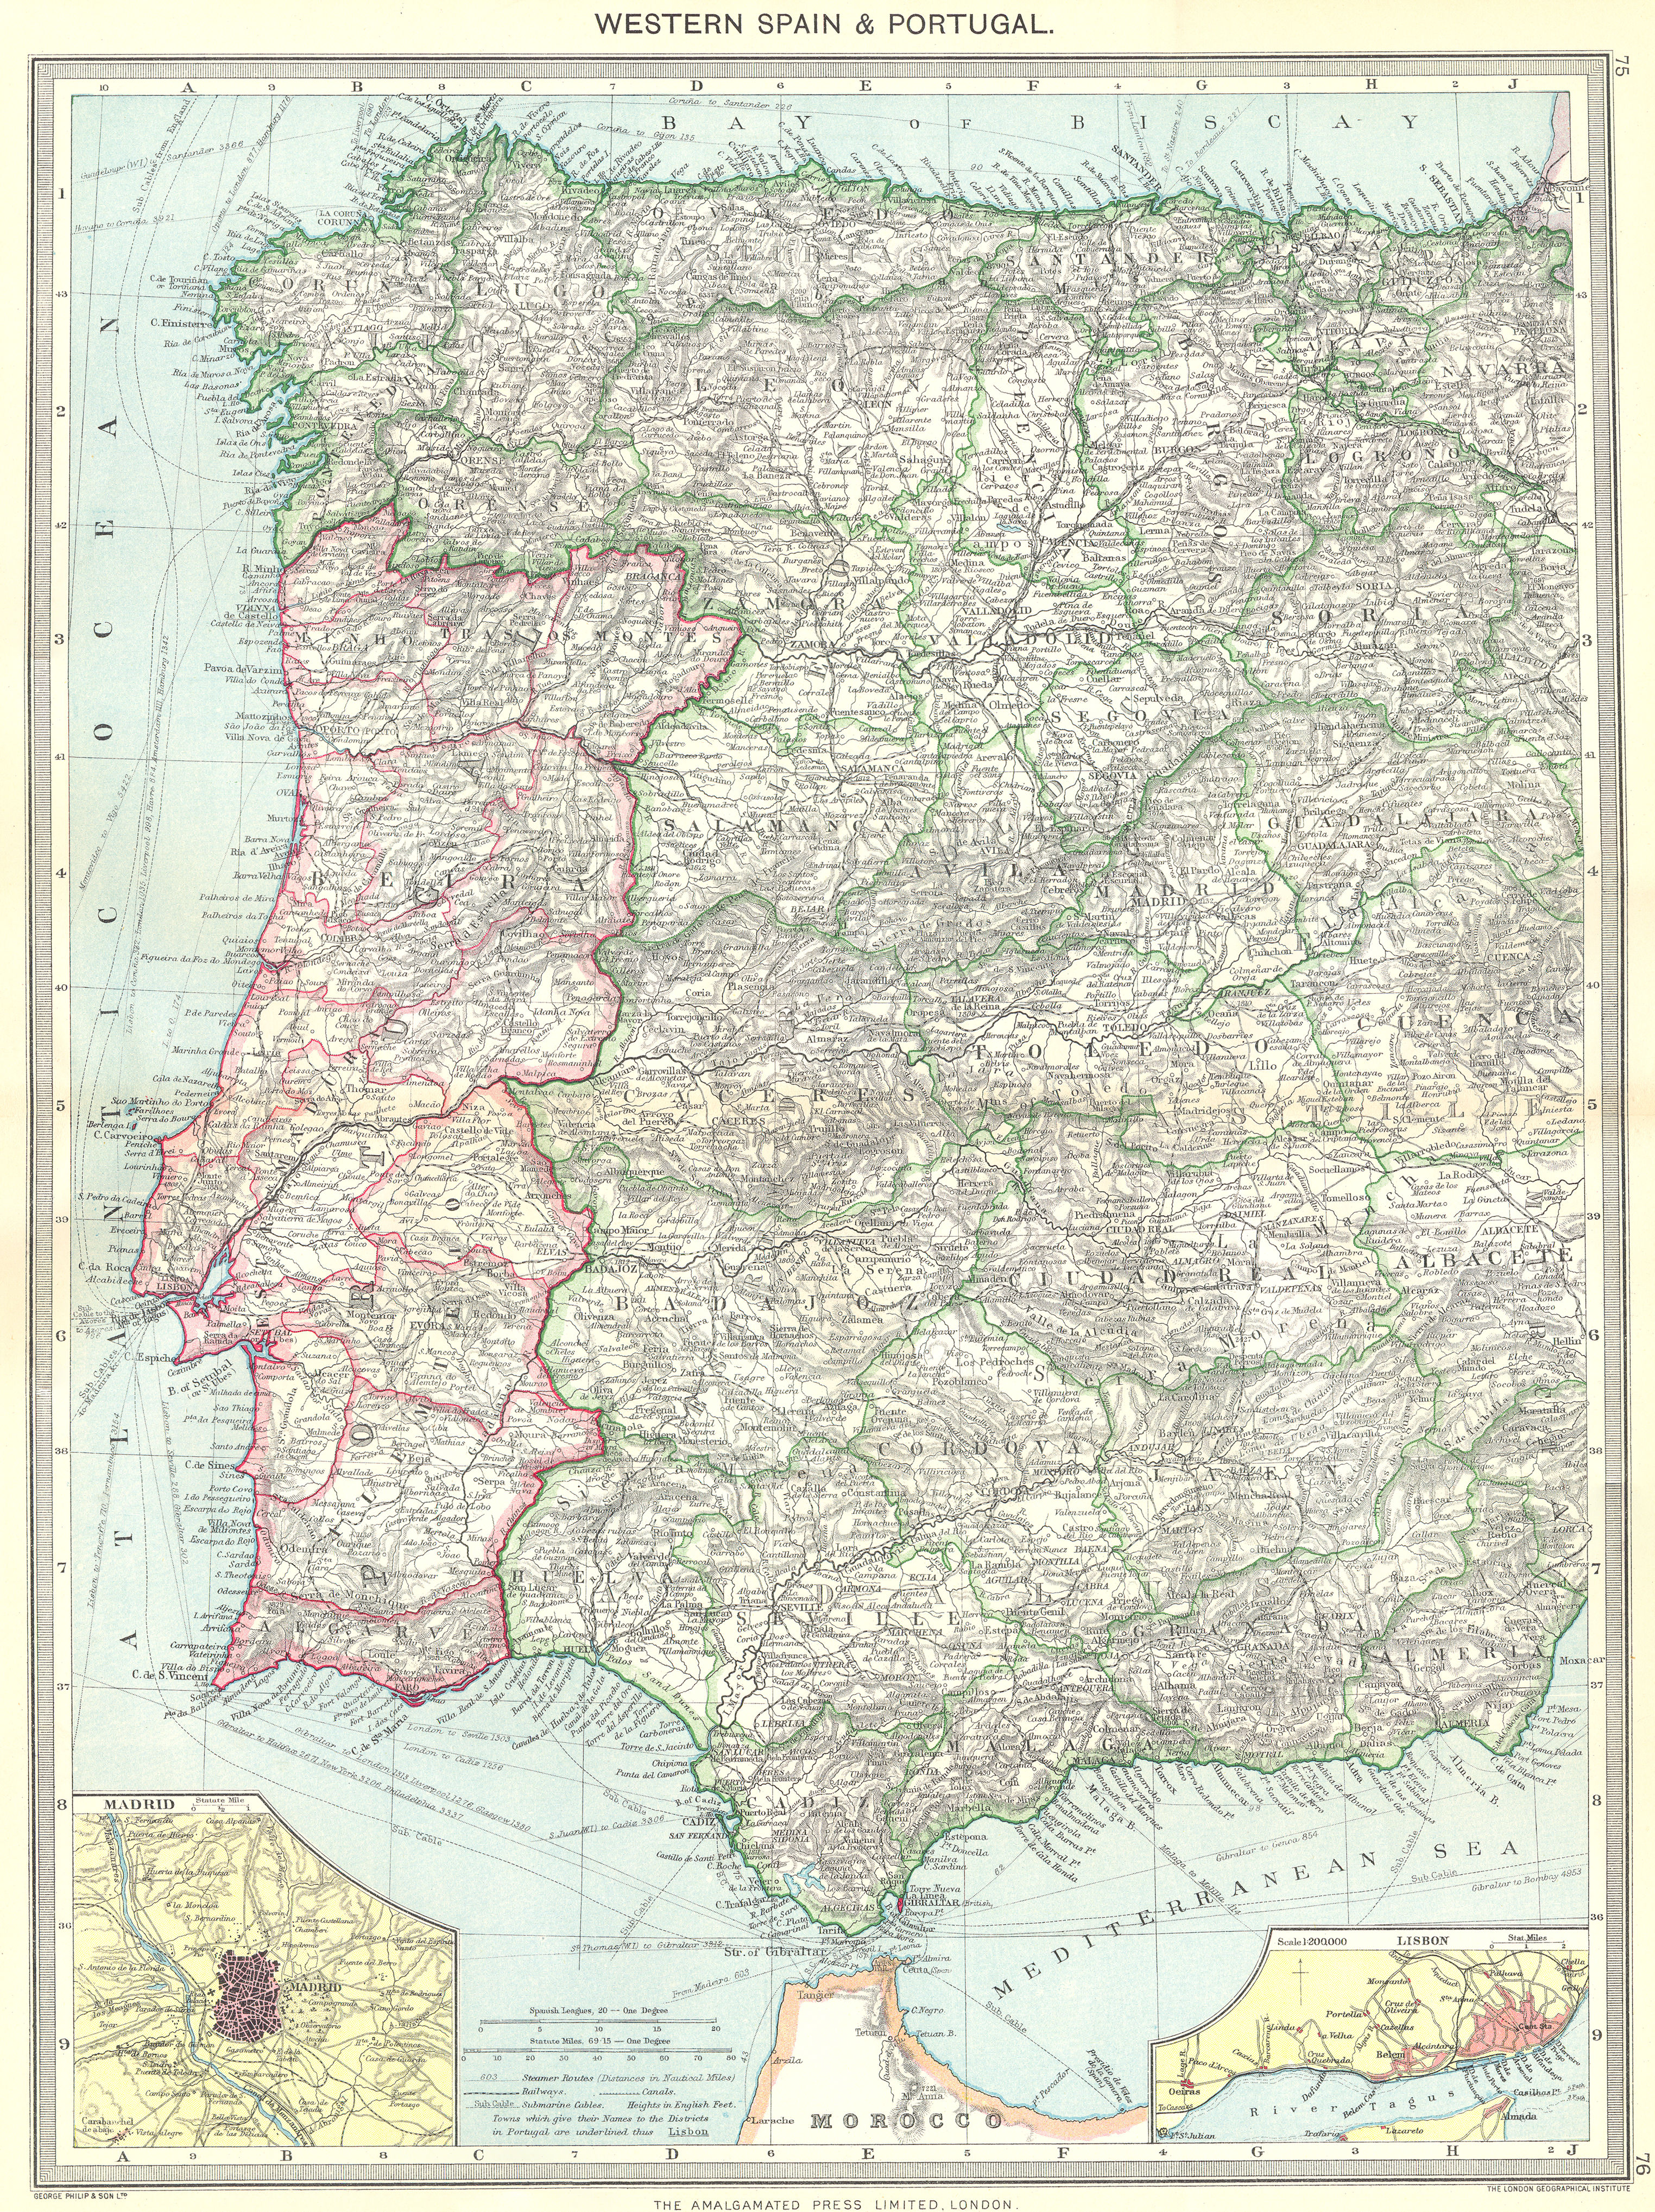 Associate Product SPAIN. Western & Portugal; map of Madrid; Lisbon 1907 old antique chart